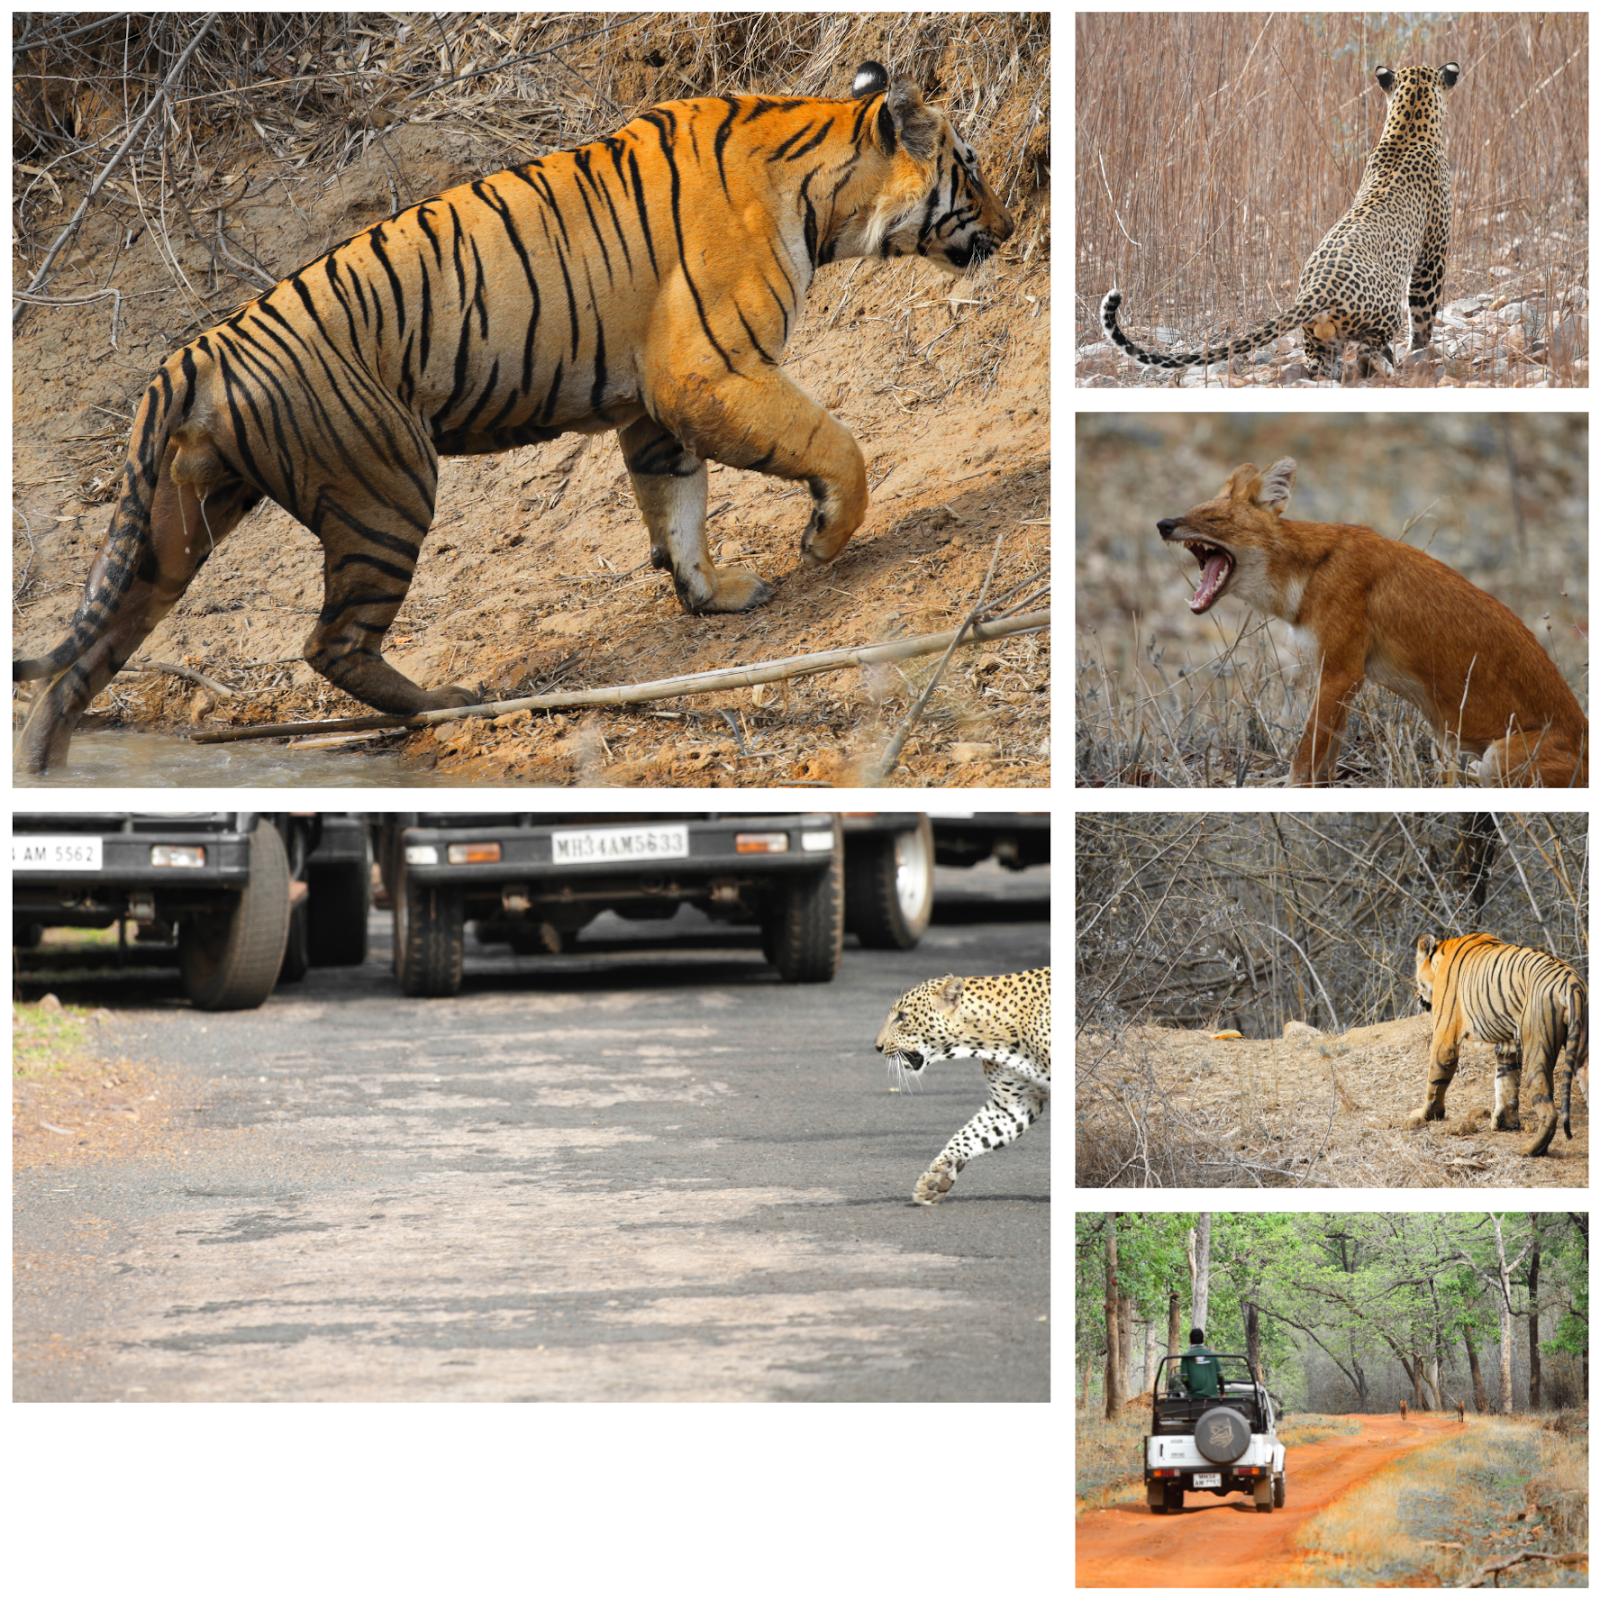 A luxury wildlife holiday - Bamboo Forest Safari Lodge - Tadoba Tiger Reserve